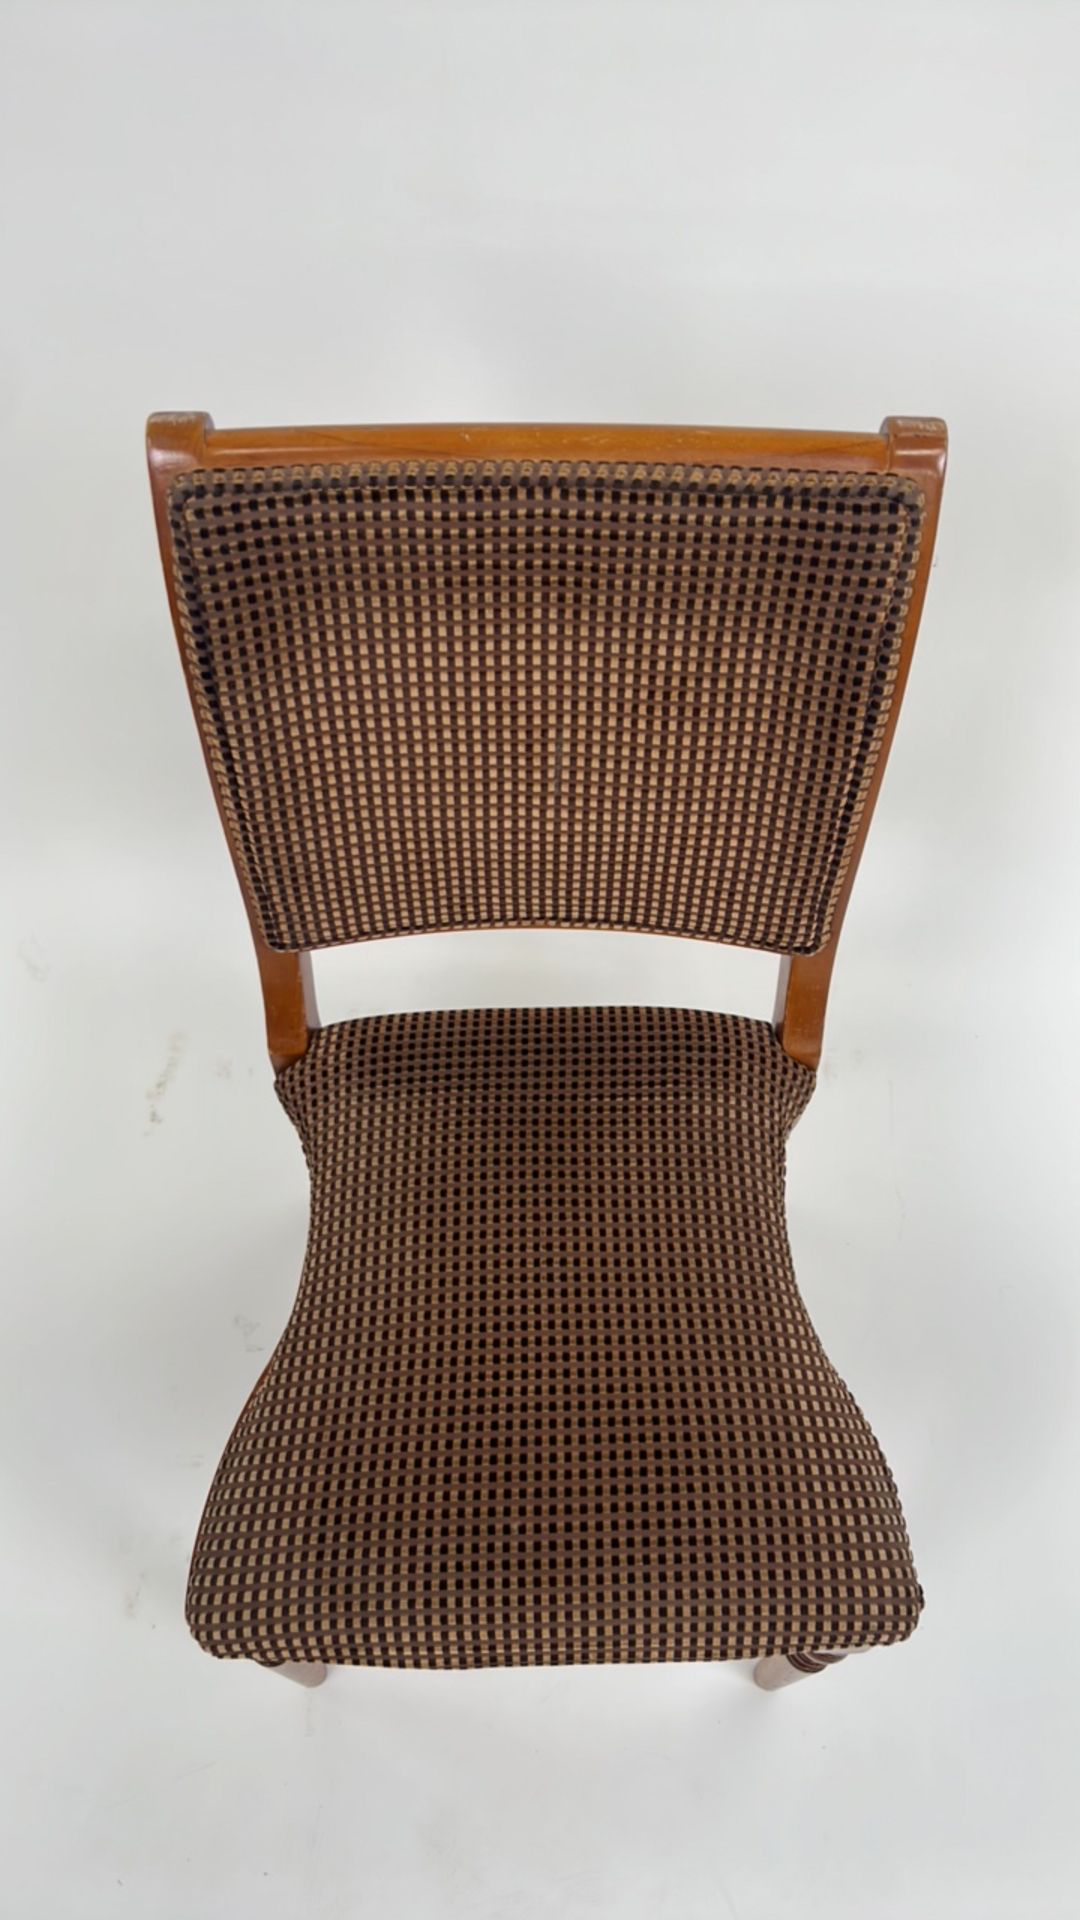 Wooden and Fabric Chair - Image 3 of 6